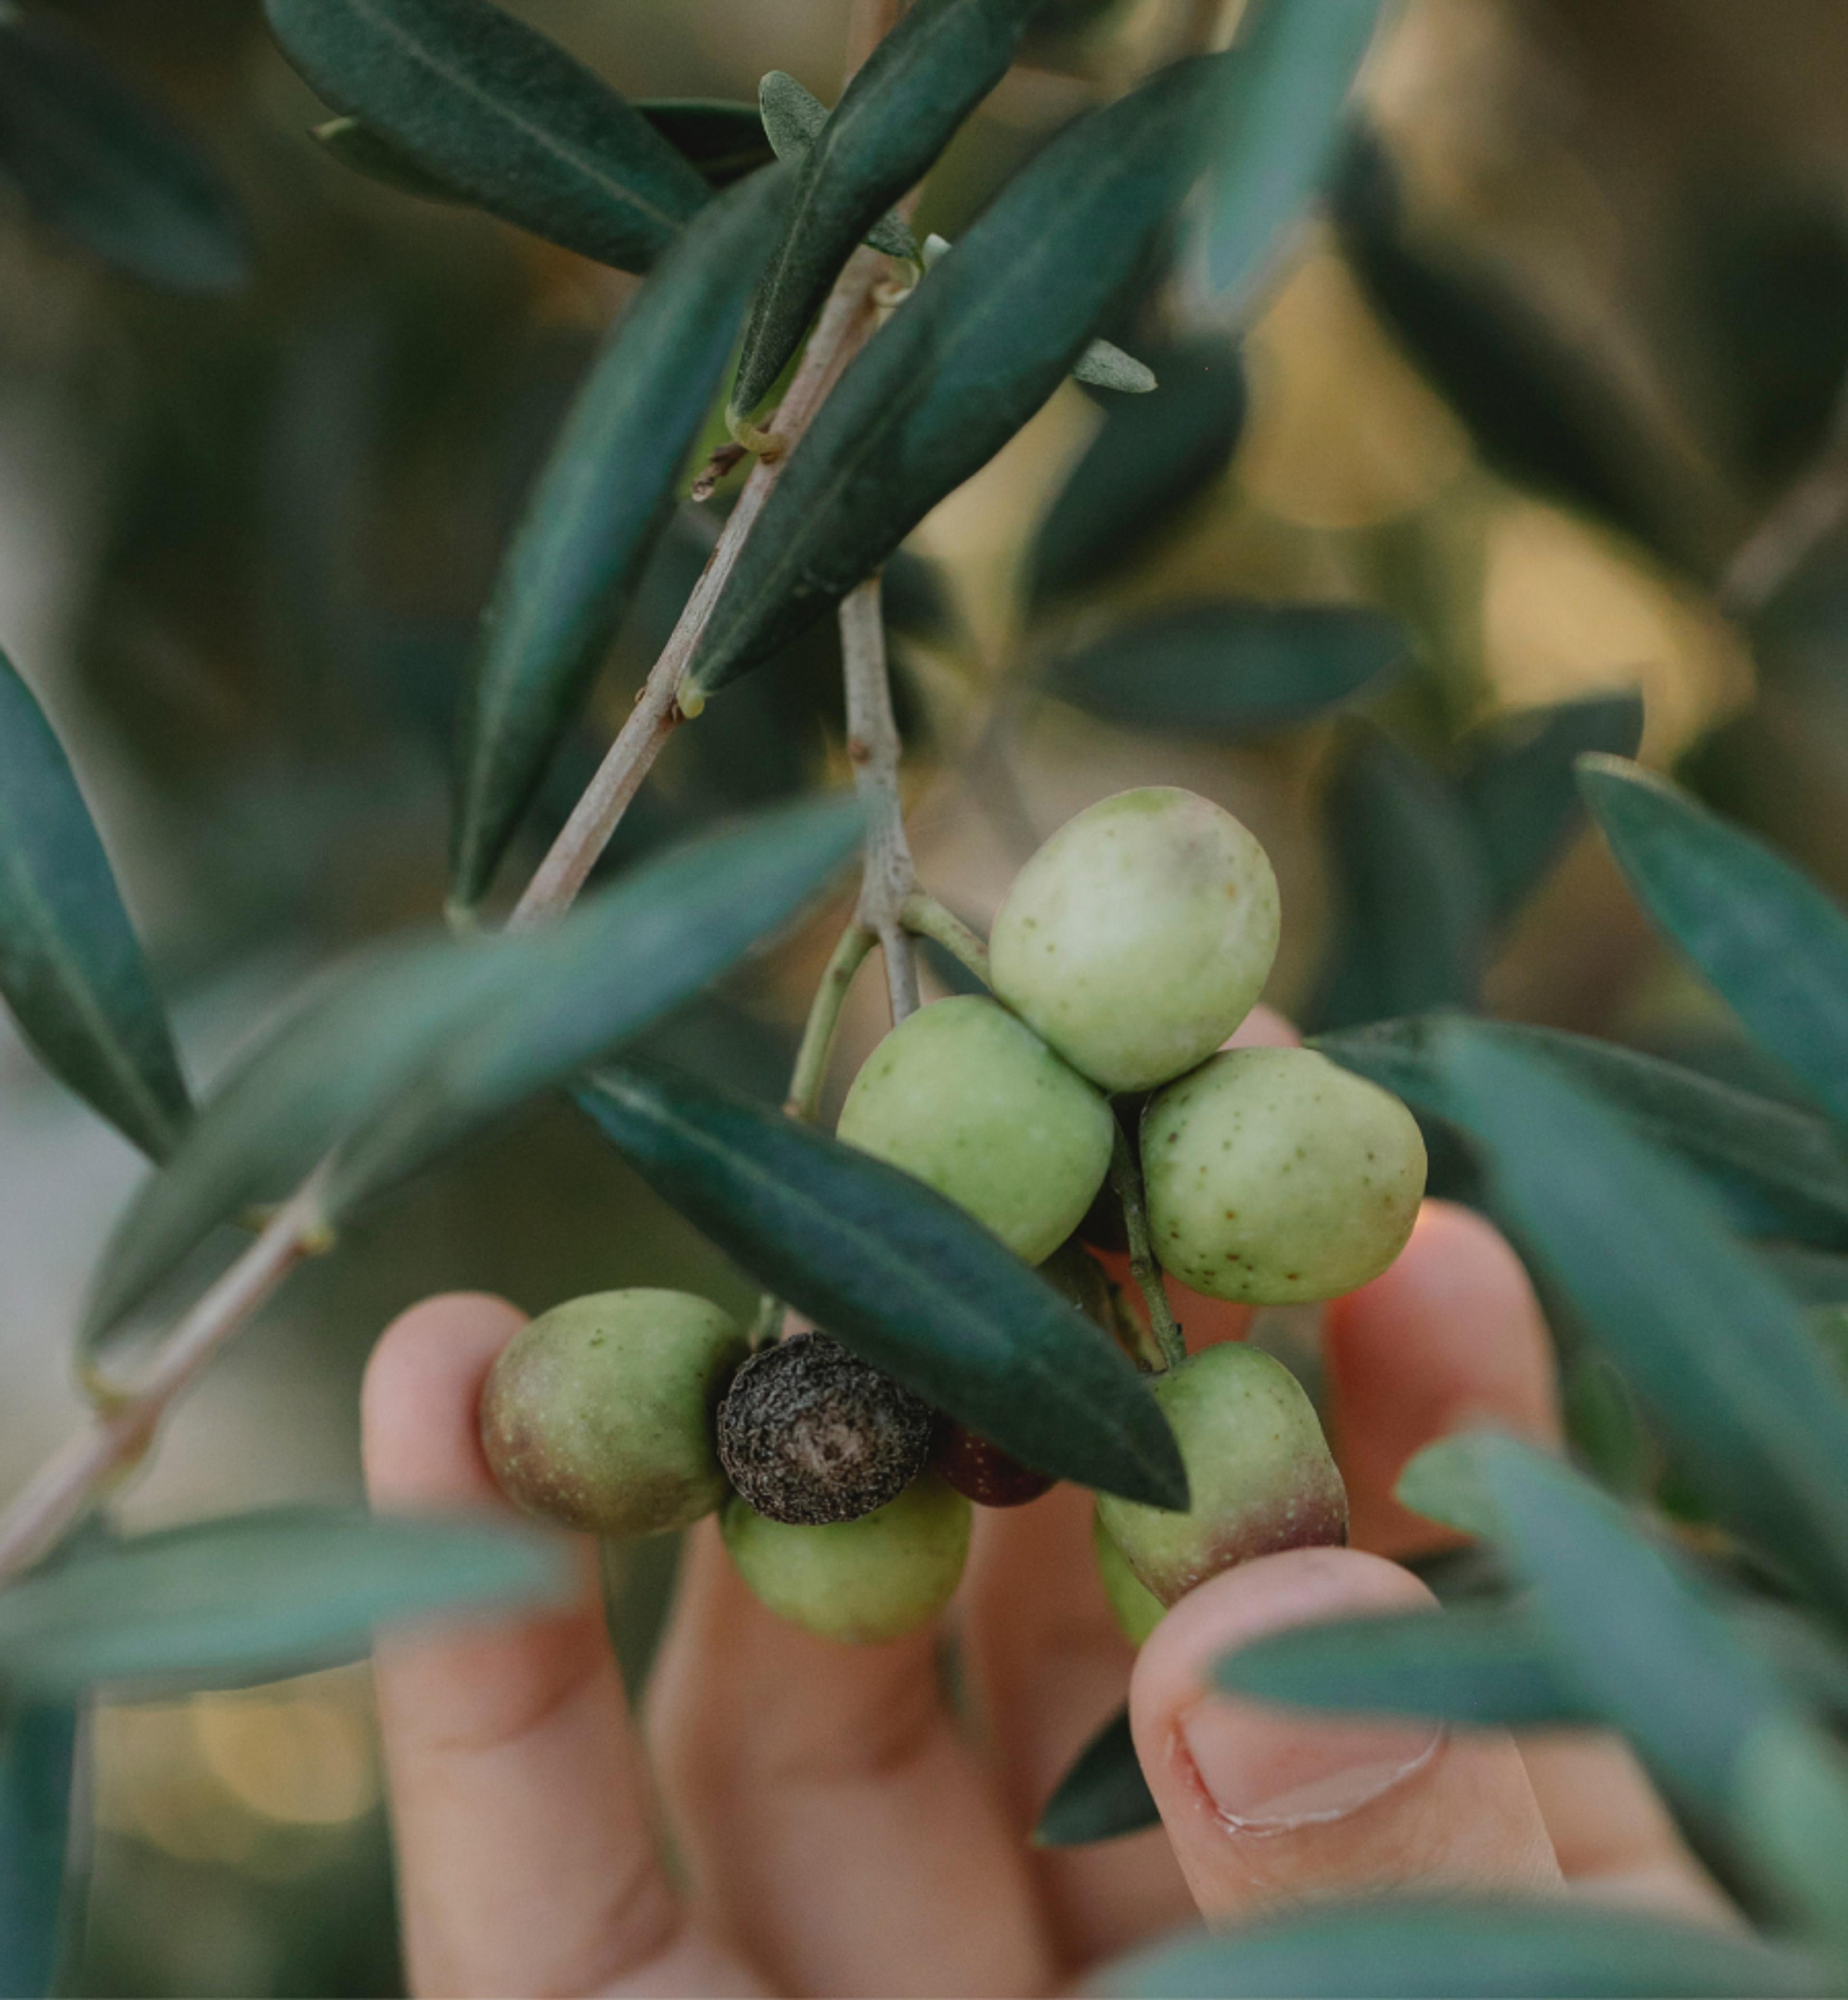  A hand picking some olives from a tree.